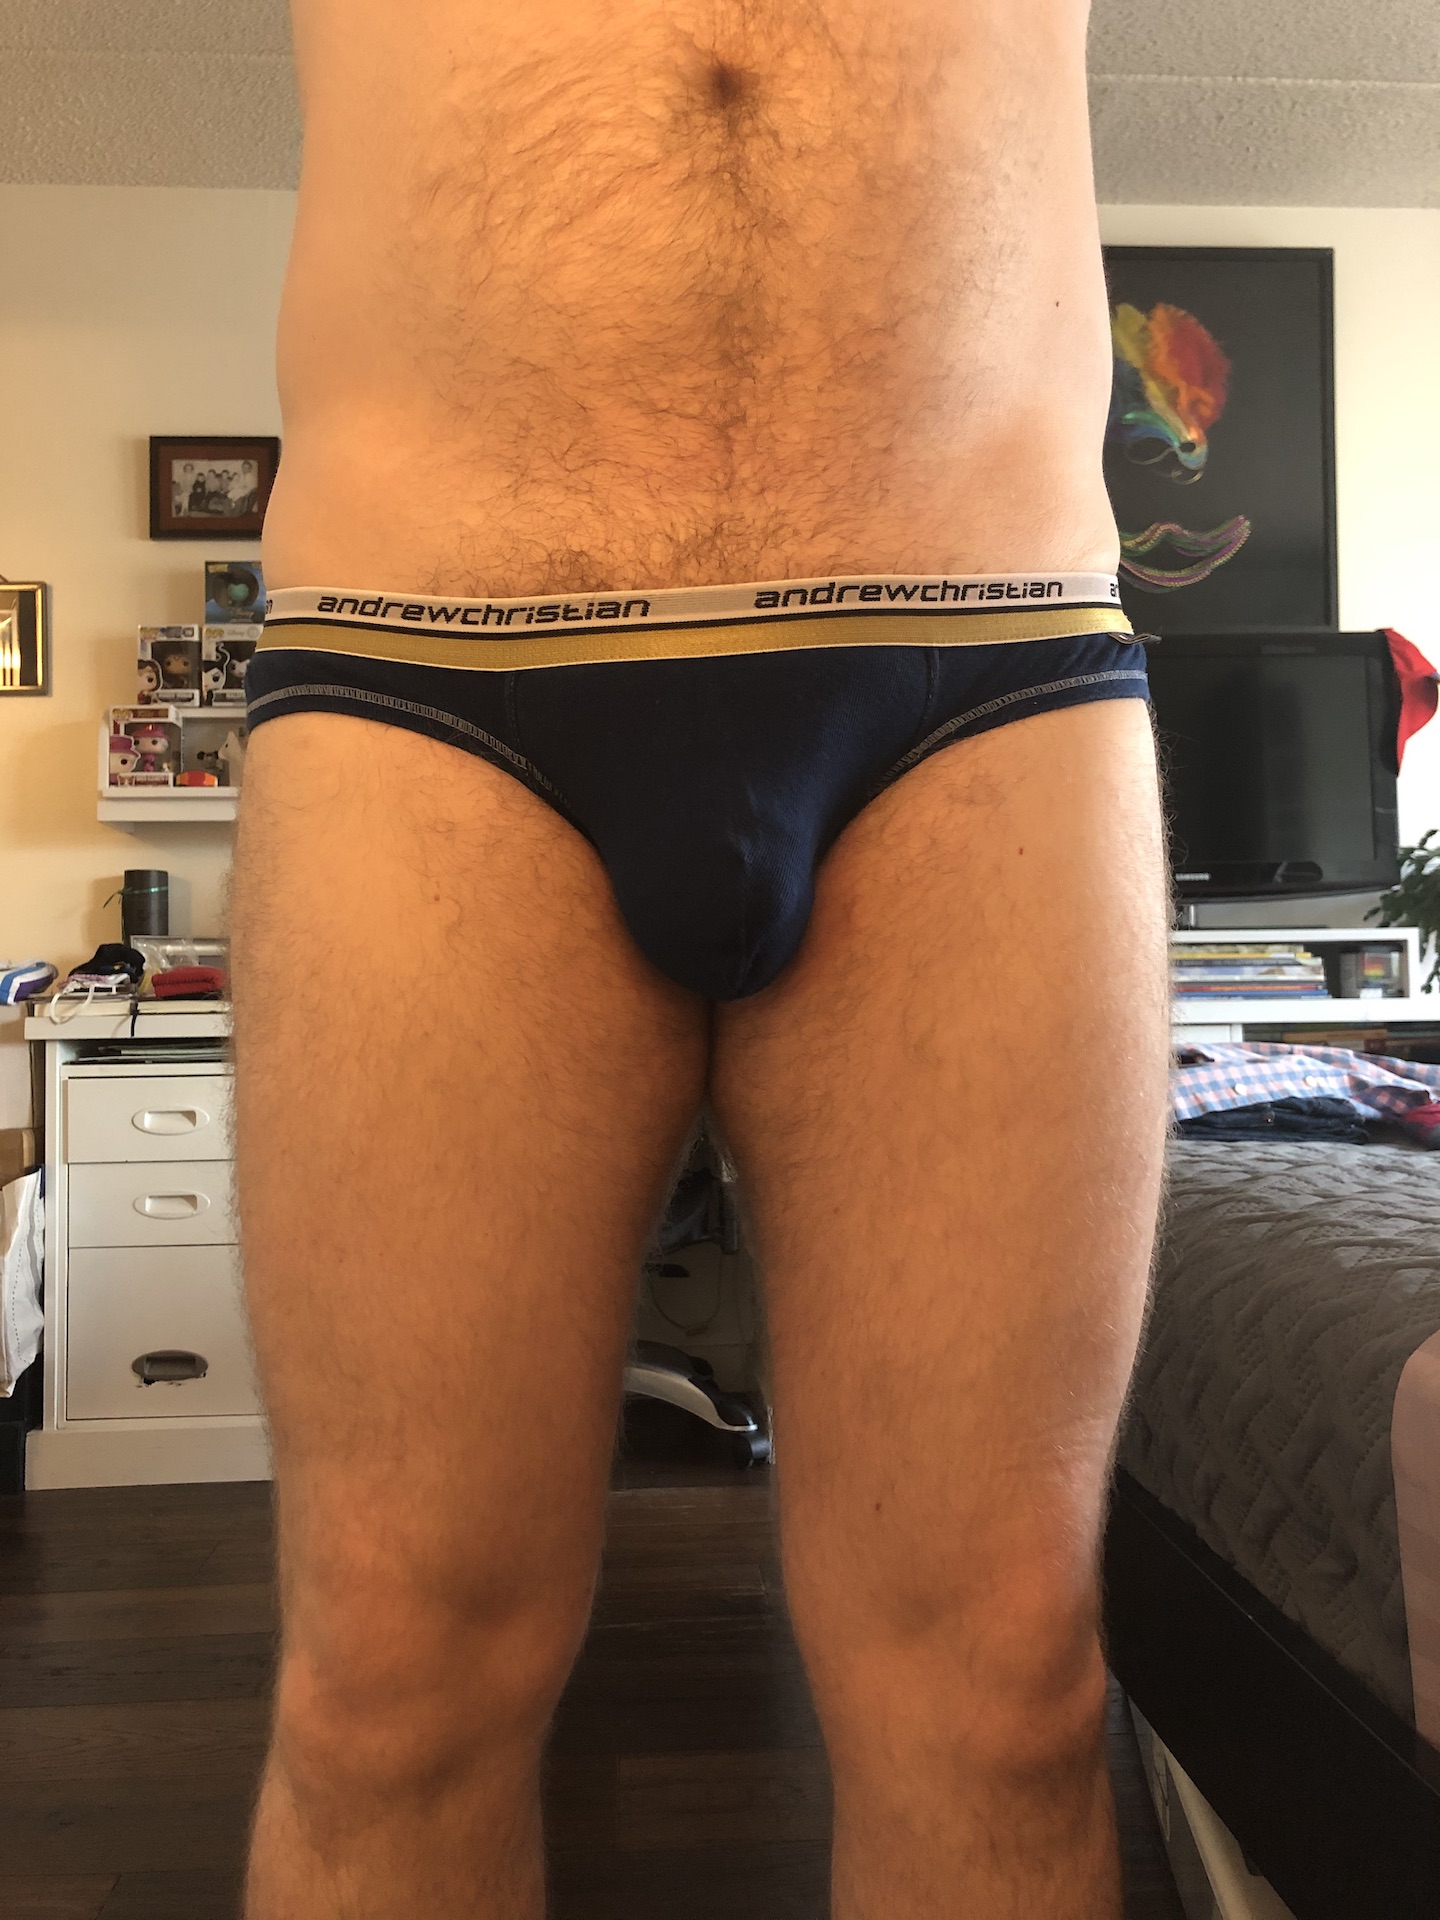 Auction undies because I had to have this colour…